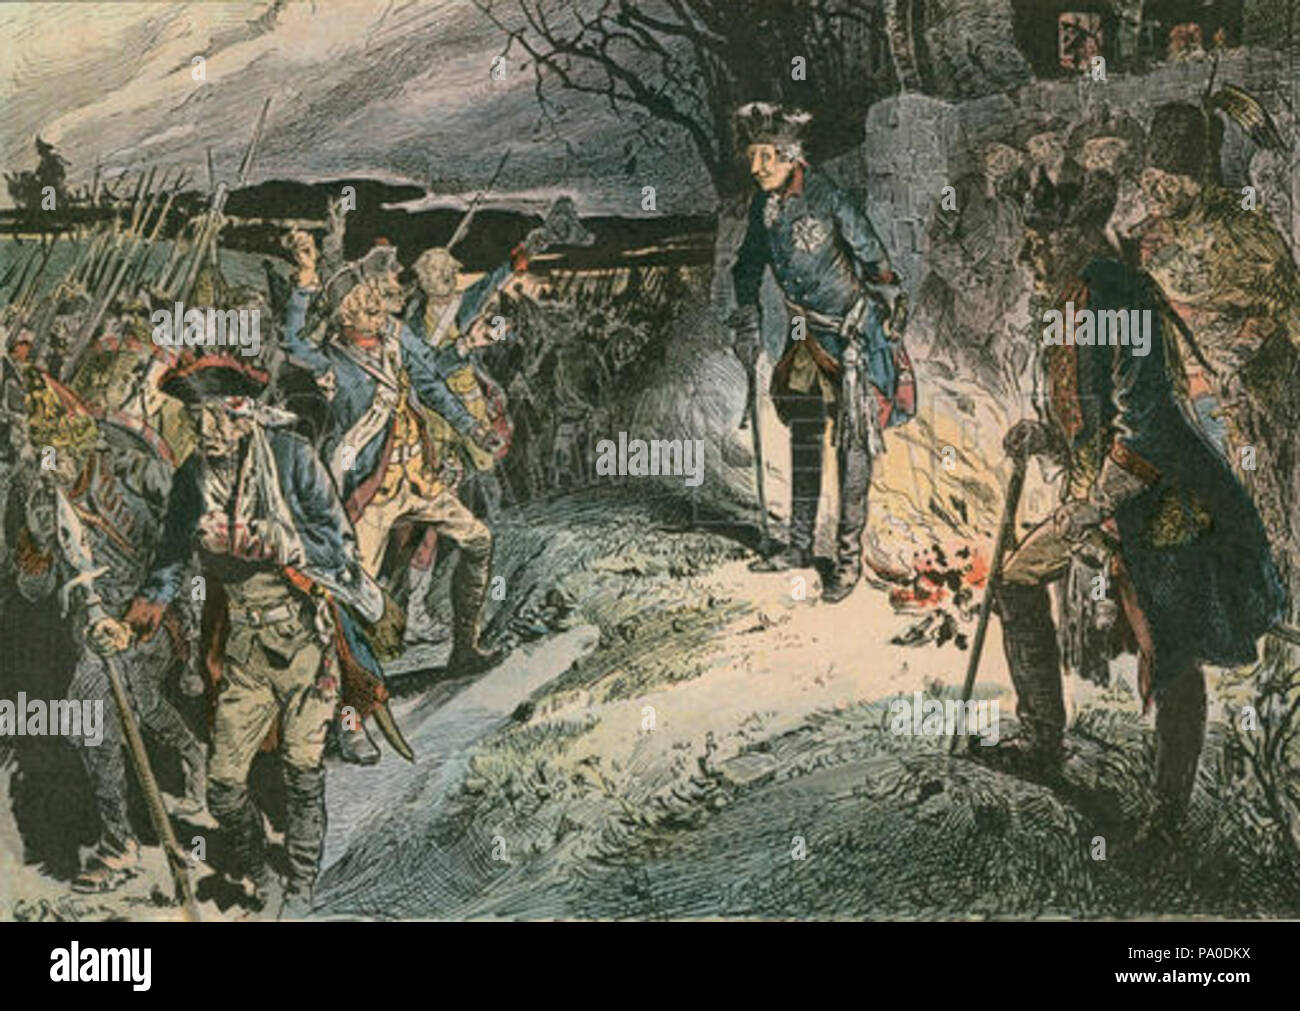 Frederick the Great (1712-1786) after defeat at the Battle of Hochkirch in 1758. Part of the Seven Years' War, the battle took place between Prussian and Austrian troops on 14 October 1758. Illustration from House of Hohenzollern in Pictures and Words by Carl Rohling and Richard Sternfeld. Published by Martin Oldenbourg in Berlin, c 1900. 673 Frederick the Great after the Battle of Hochkirch in 1758 by Carl Röchling Stock Photo